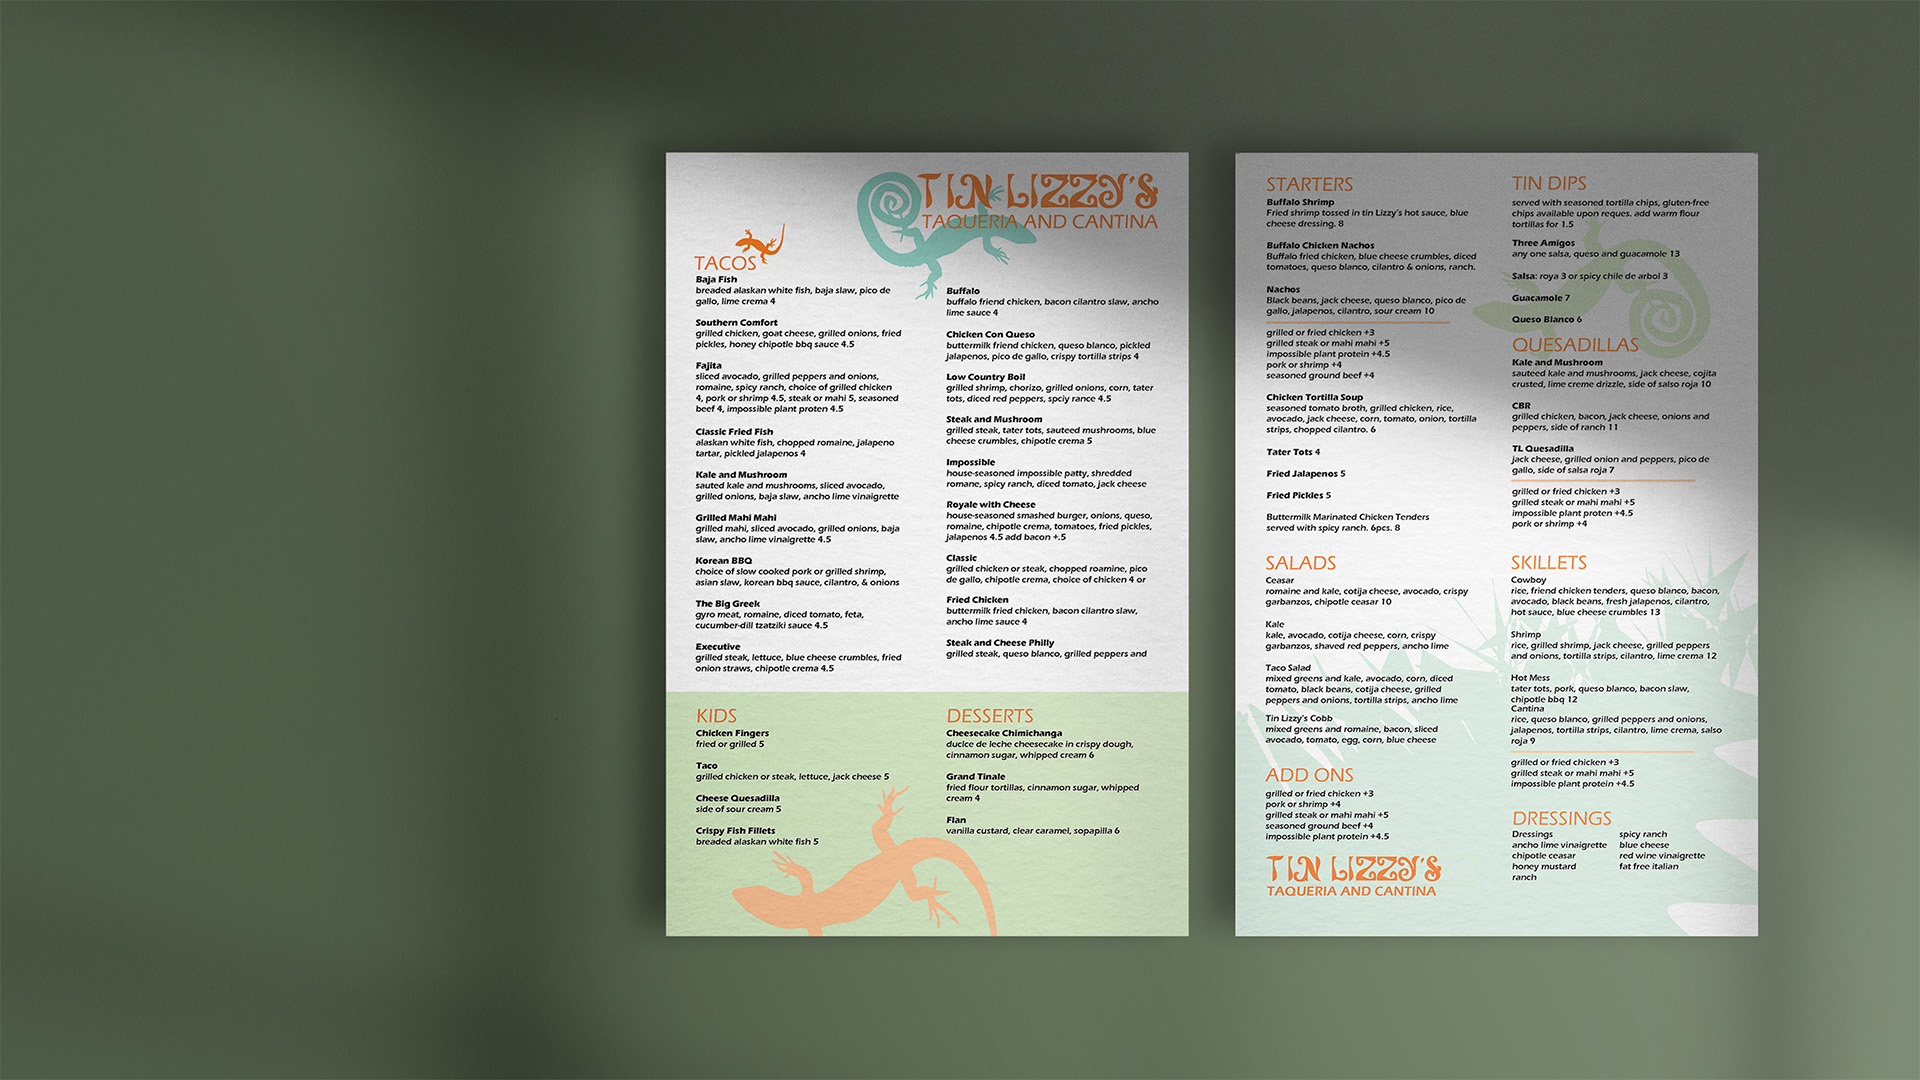 “Tin Lizzy’s Restaurant Menu”  / “Tin Lizzy’s Restaurant Menu,” redesigned menu for Tin Lizzy’s Taqueria and Cantina, 11 x 17 inch printed menu, 2022. This redesign brings  the fun and colorful vibe of the restaurant to the menu design.